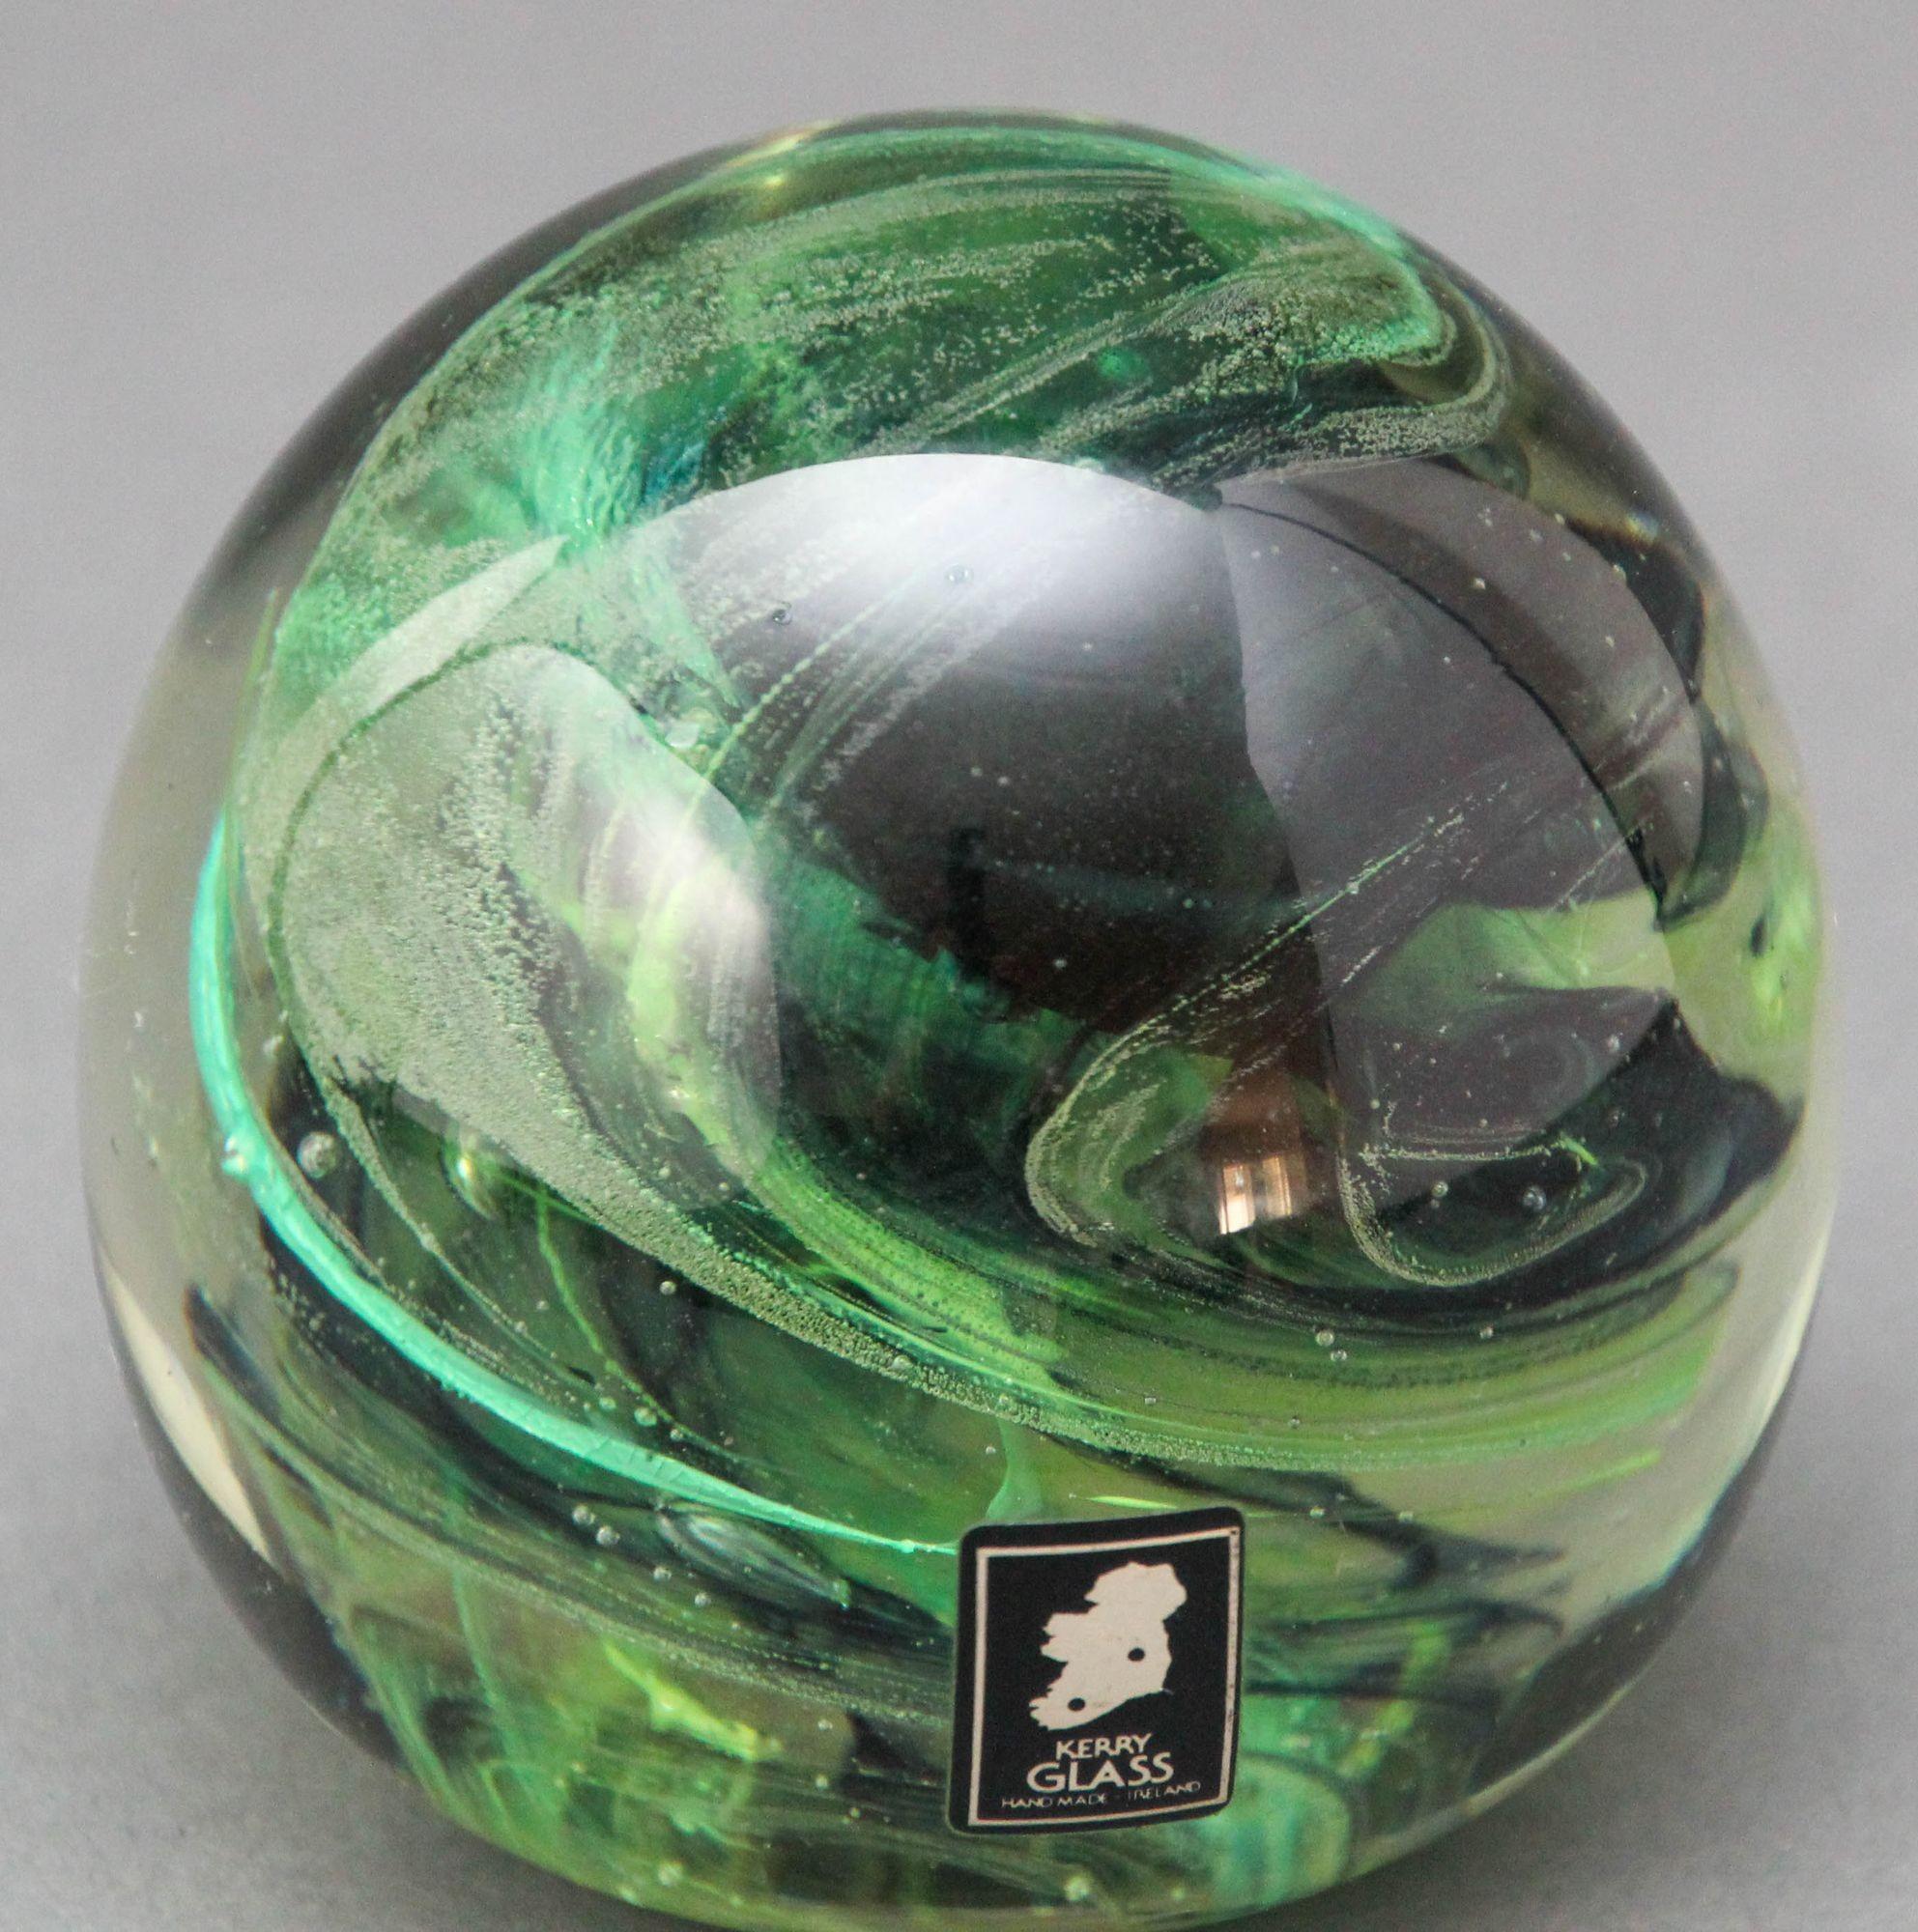 kerry glass paperweight